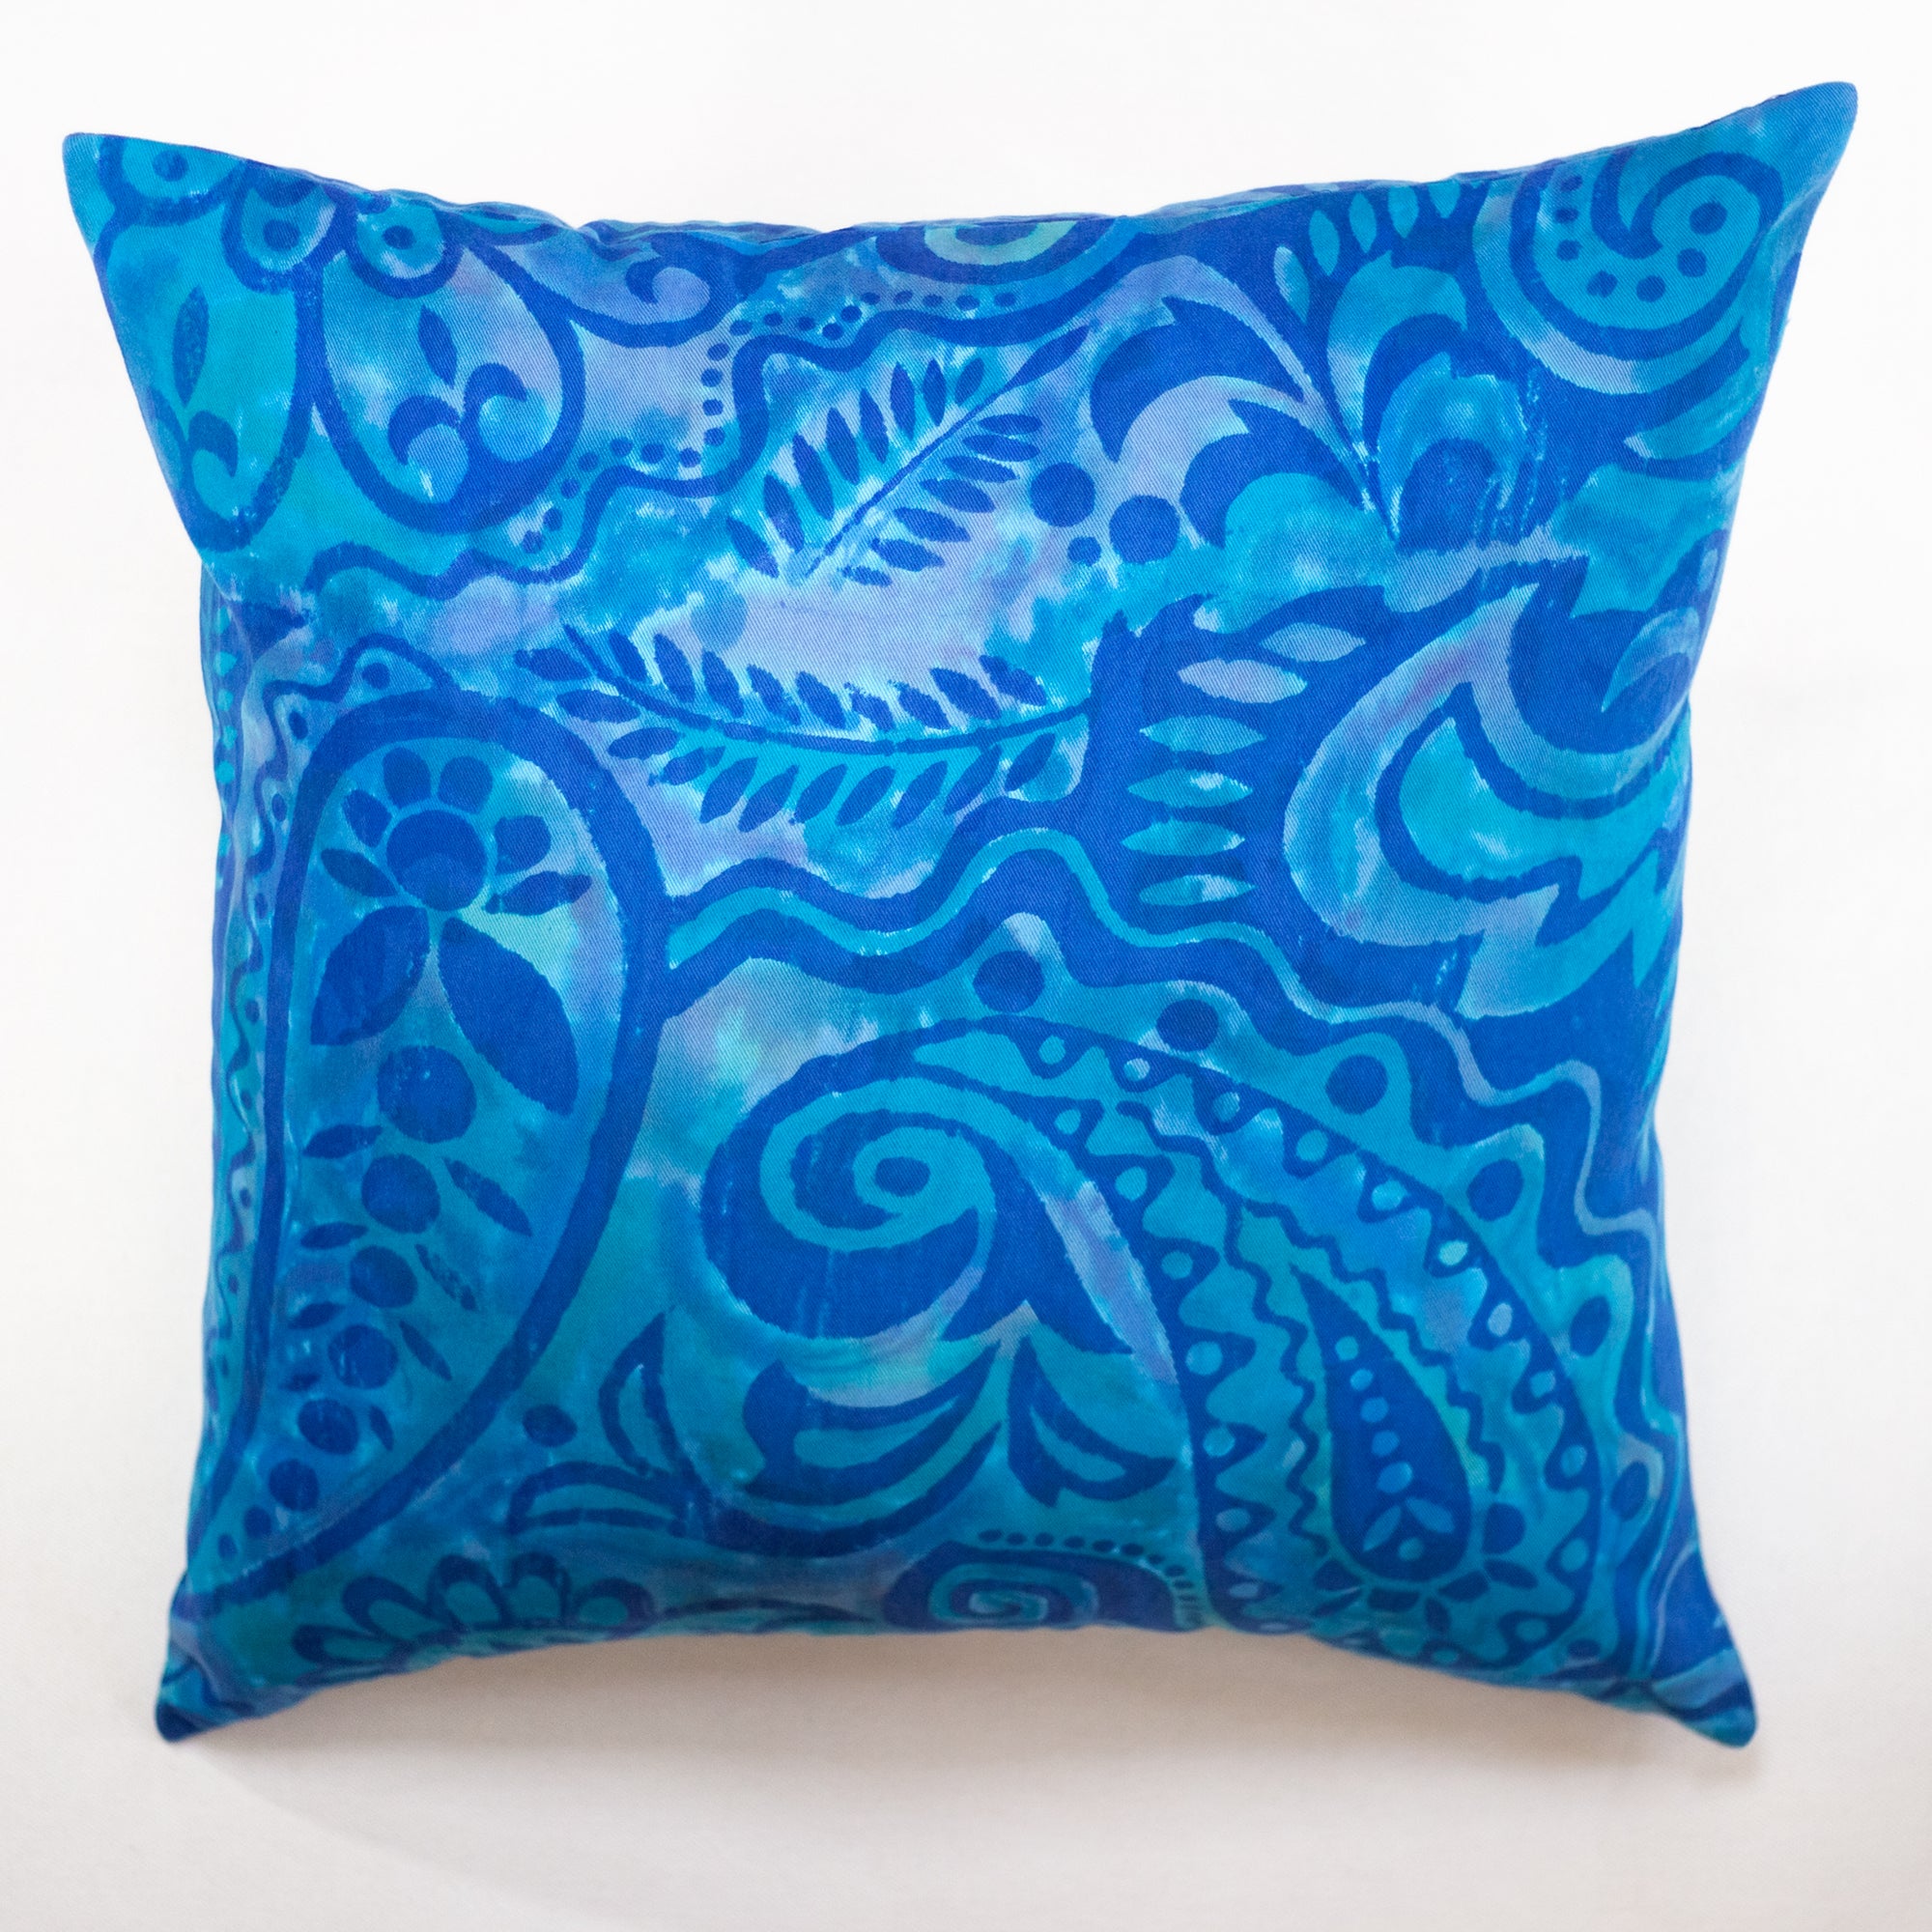 Hand Painted Accent Pillow Cover - Ocean Blue